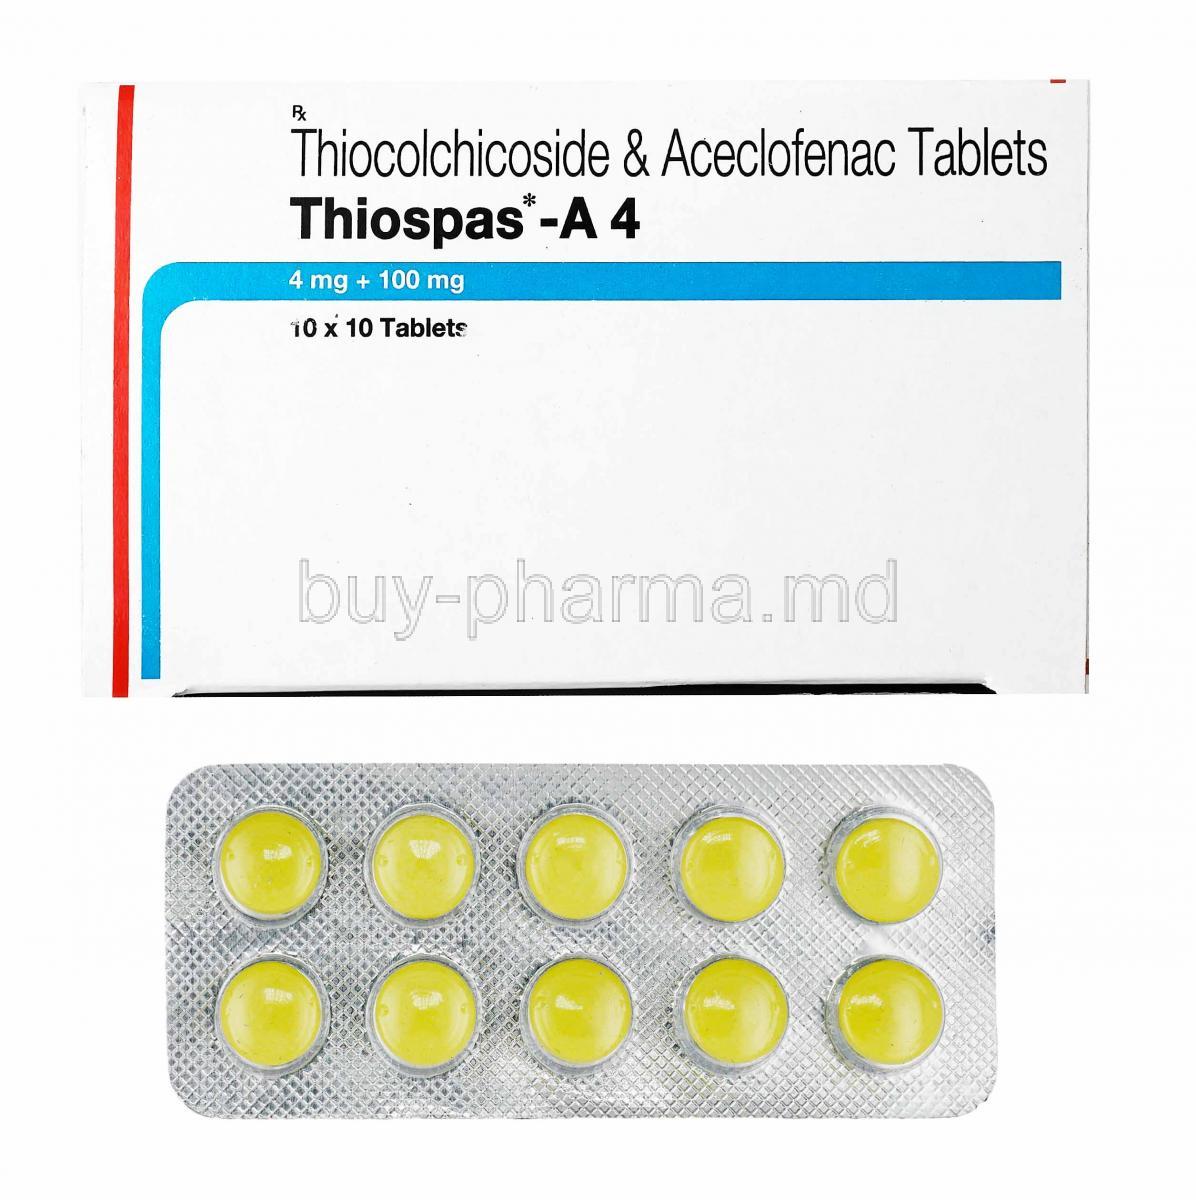 Thiospas-A, Aceclofenac and Thiocolchicoside 4mg box and tablets